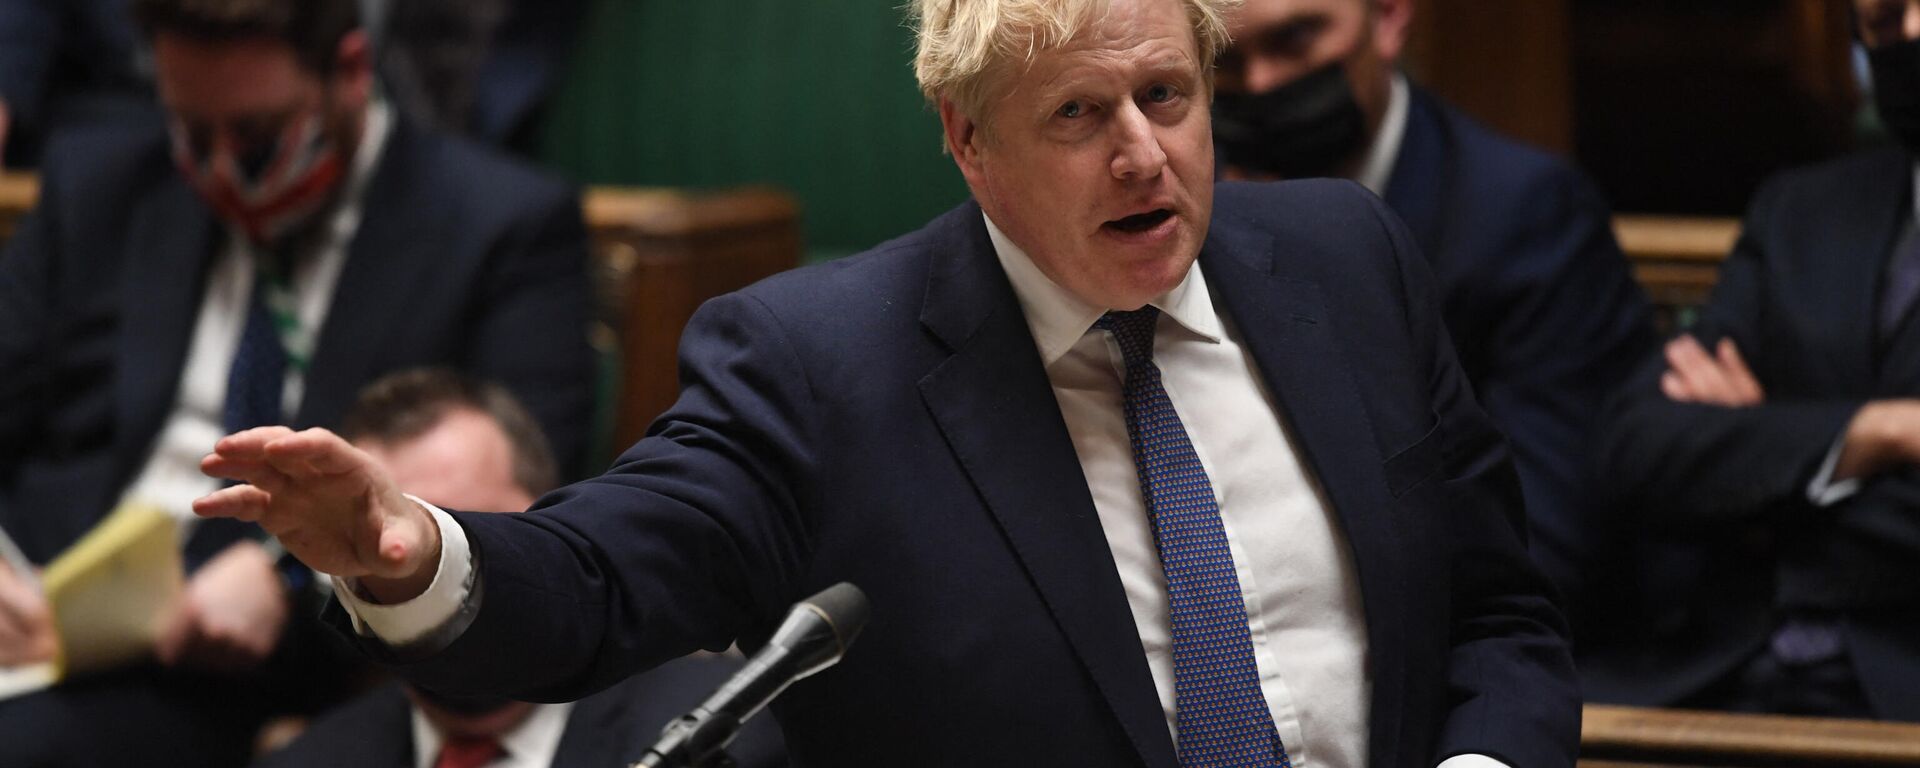 A handout photograph released by the UK Parliament shows Britain's Prime Minister Boris Johnson gesturing during the Prime Minister’s COVID-19 Update in the House of Commons in London on December 15, 2021 - Sputnik International, 1920, 19.01.2022